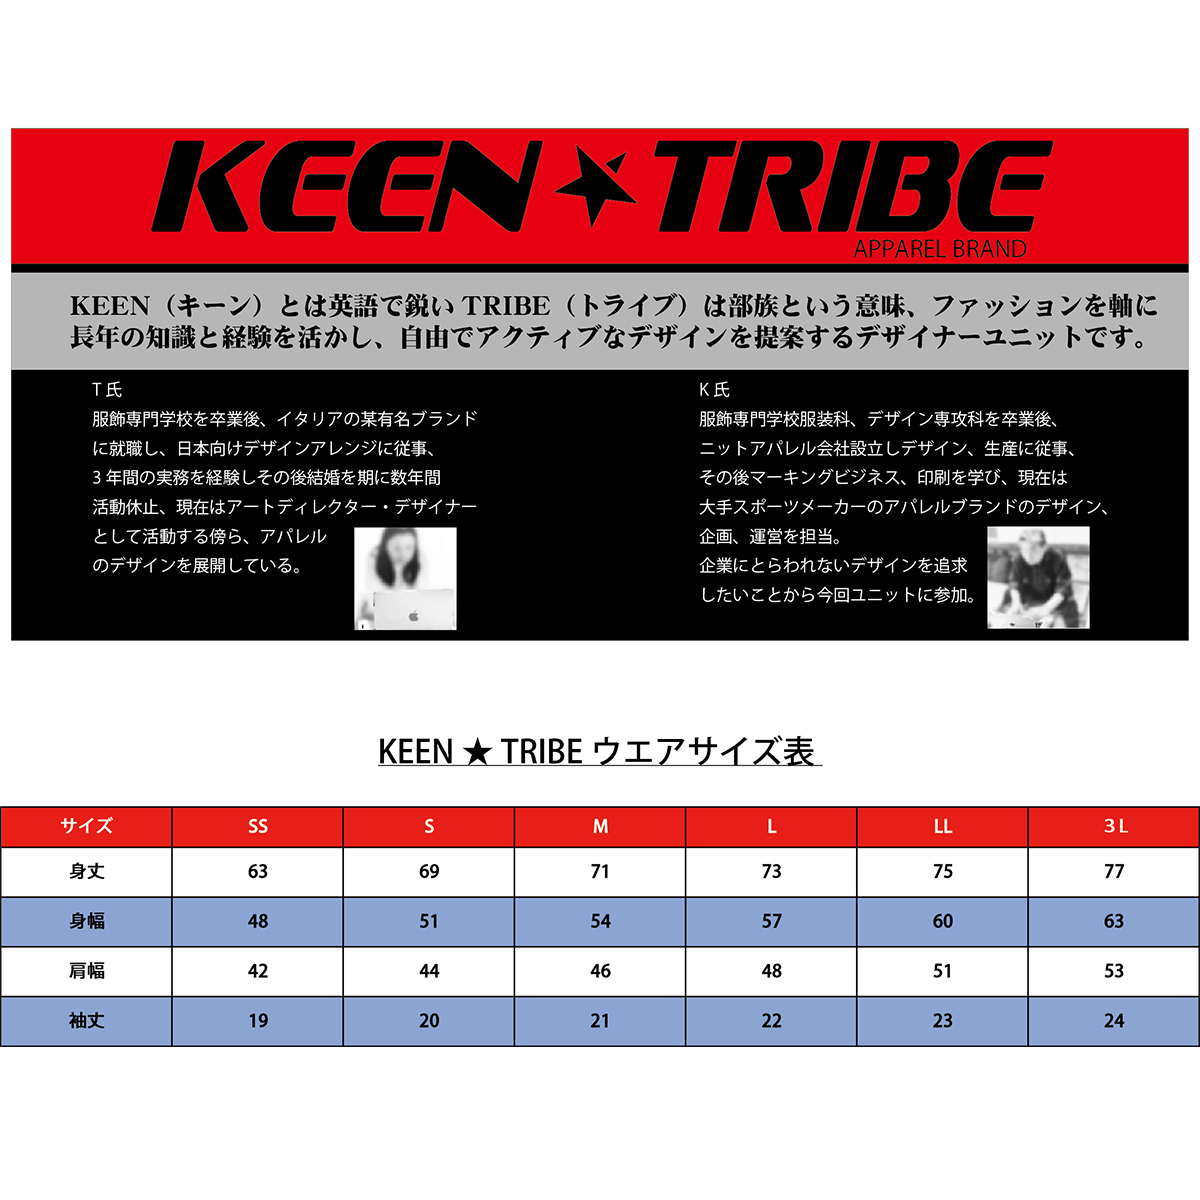 KEEN ★ TRIBE　KT-25(受注生産)